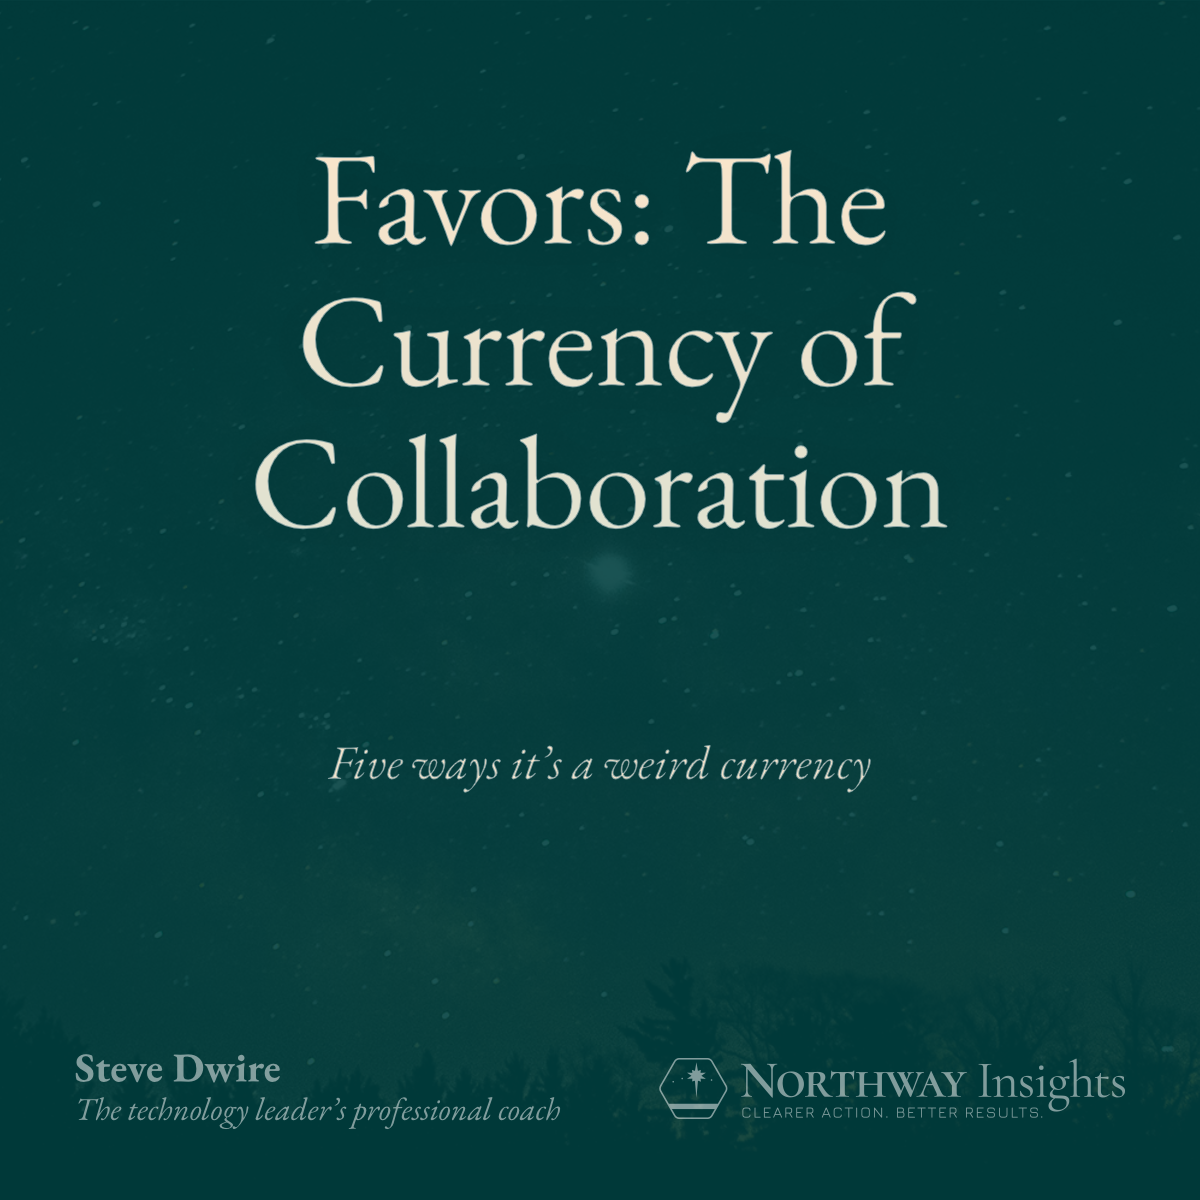 Favors: The Currency of Collaboration